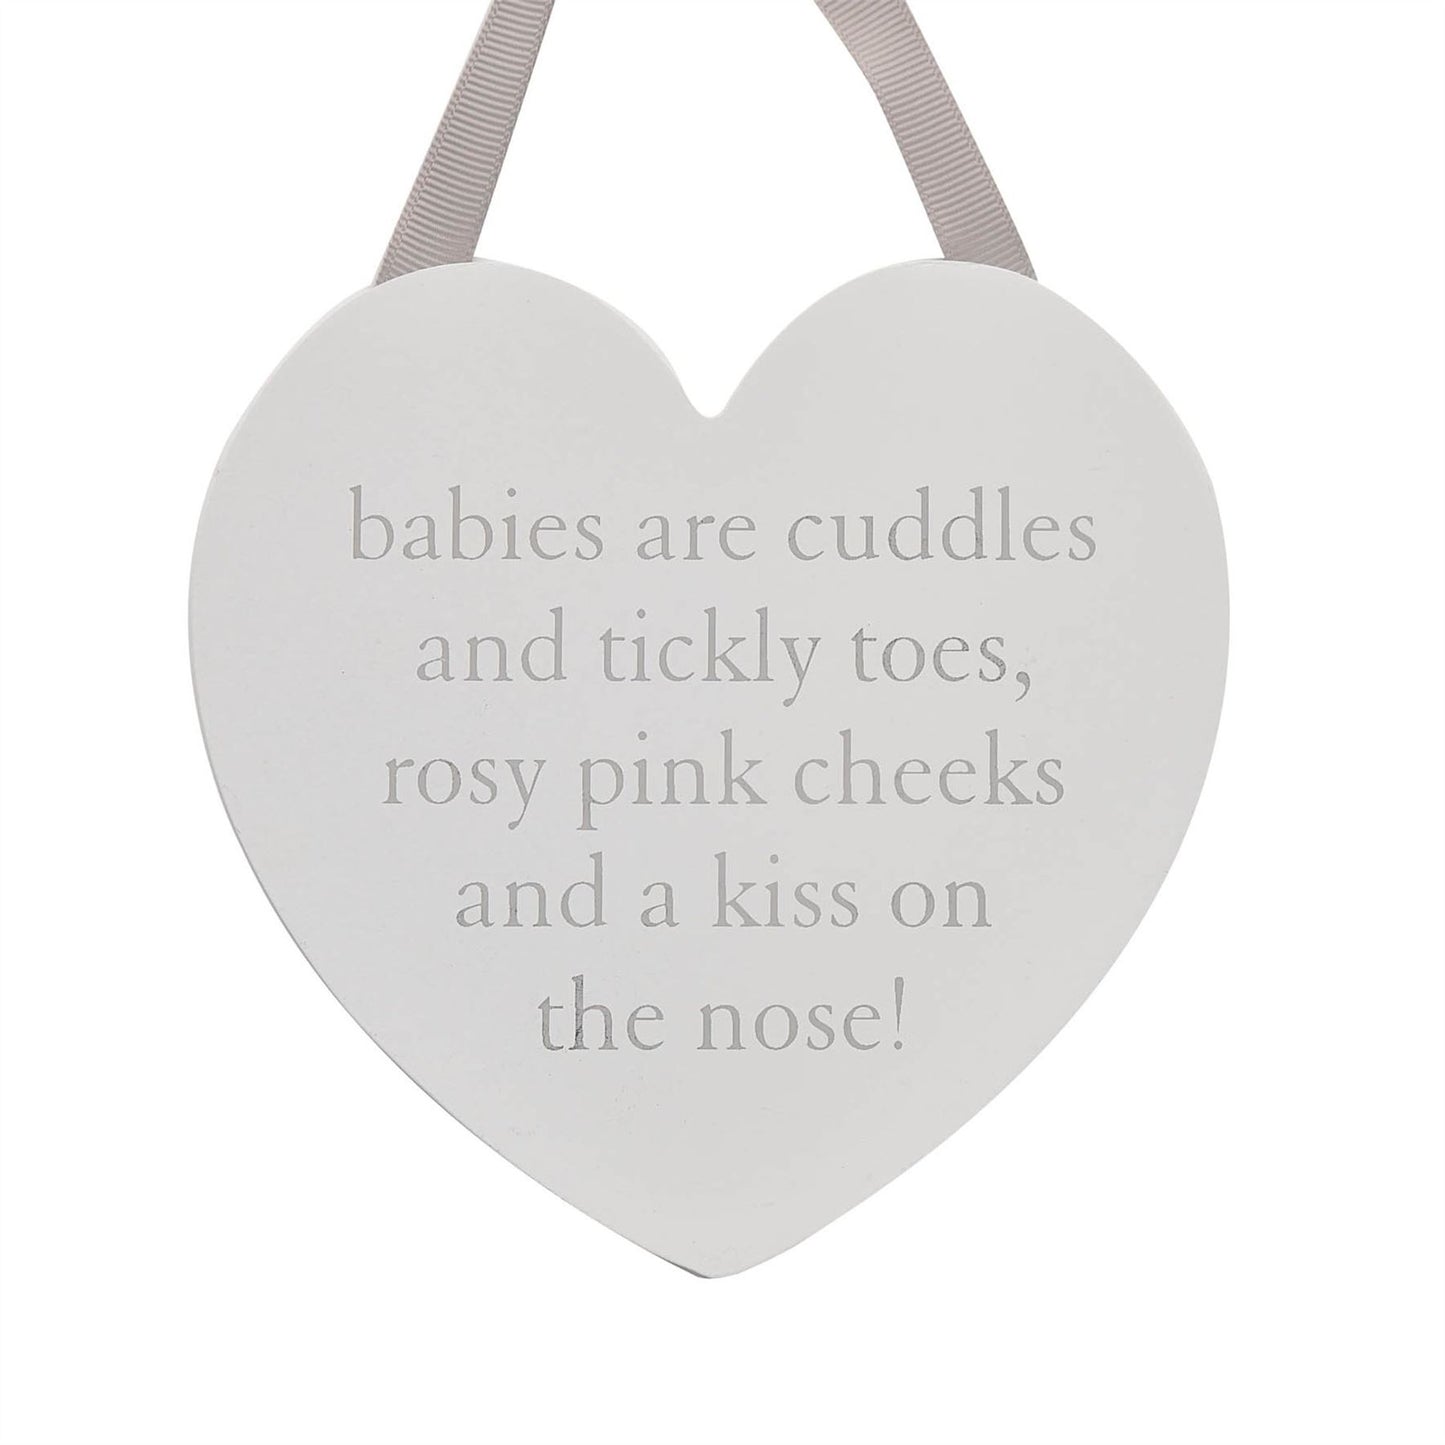 Bambino Hanging Heart Wall Plaque 'Babies are cuddles"